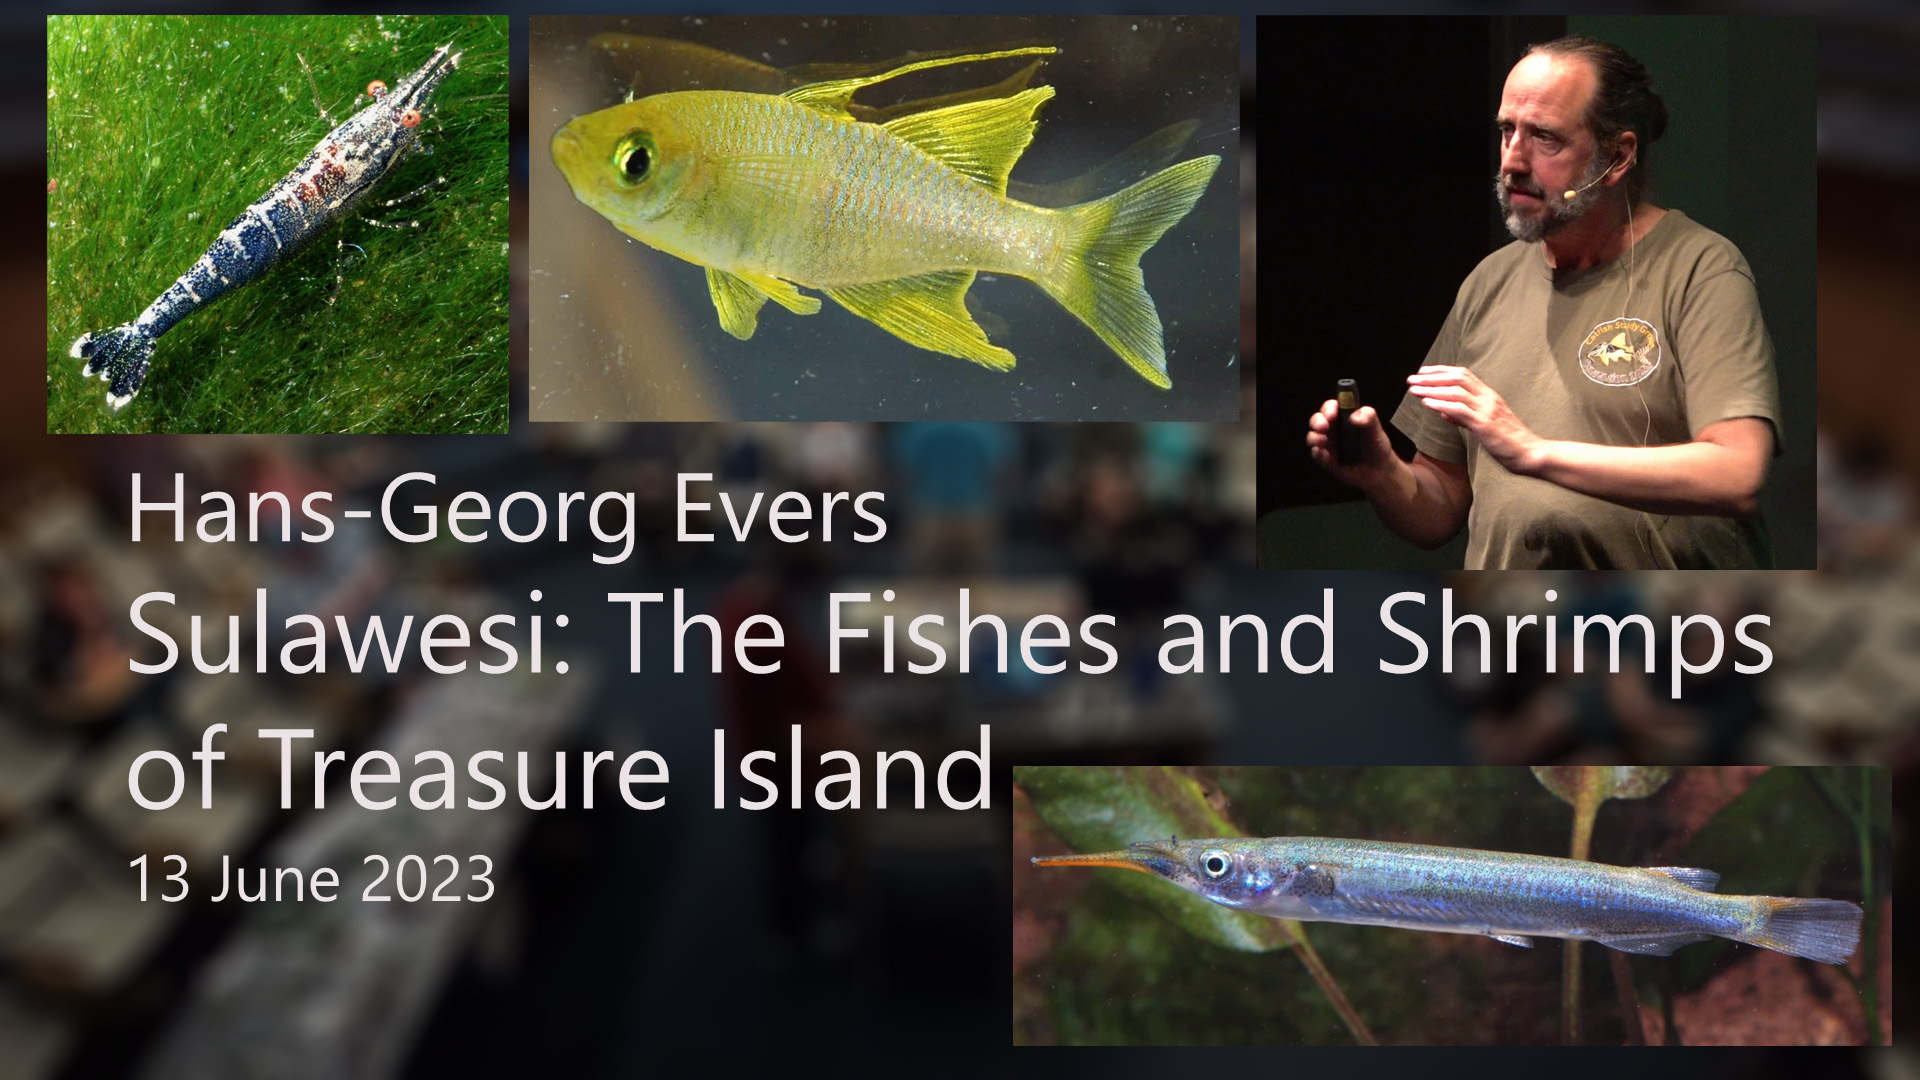 Sulawesi: The Fishes and Shimps of Treasure Island - Hans-Georg Evers - Tuesday, June 13, 2023